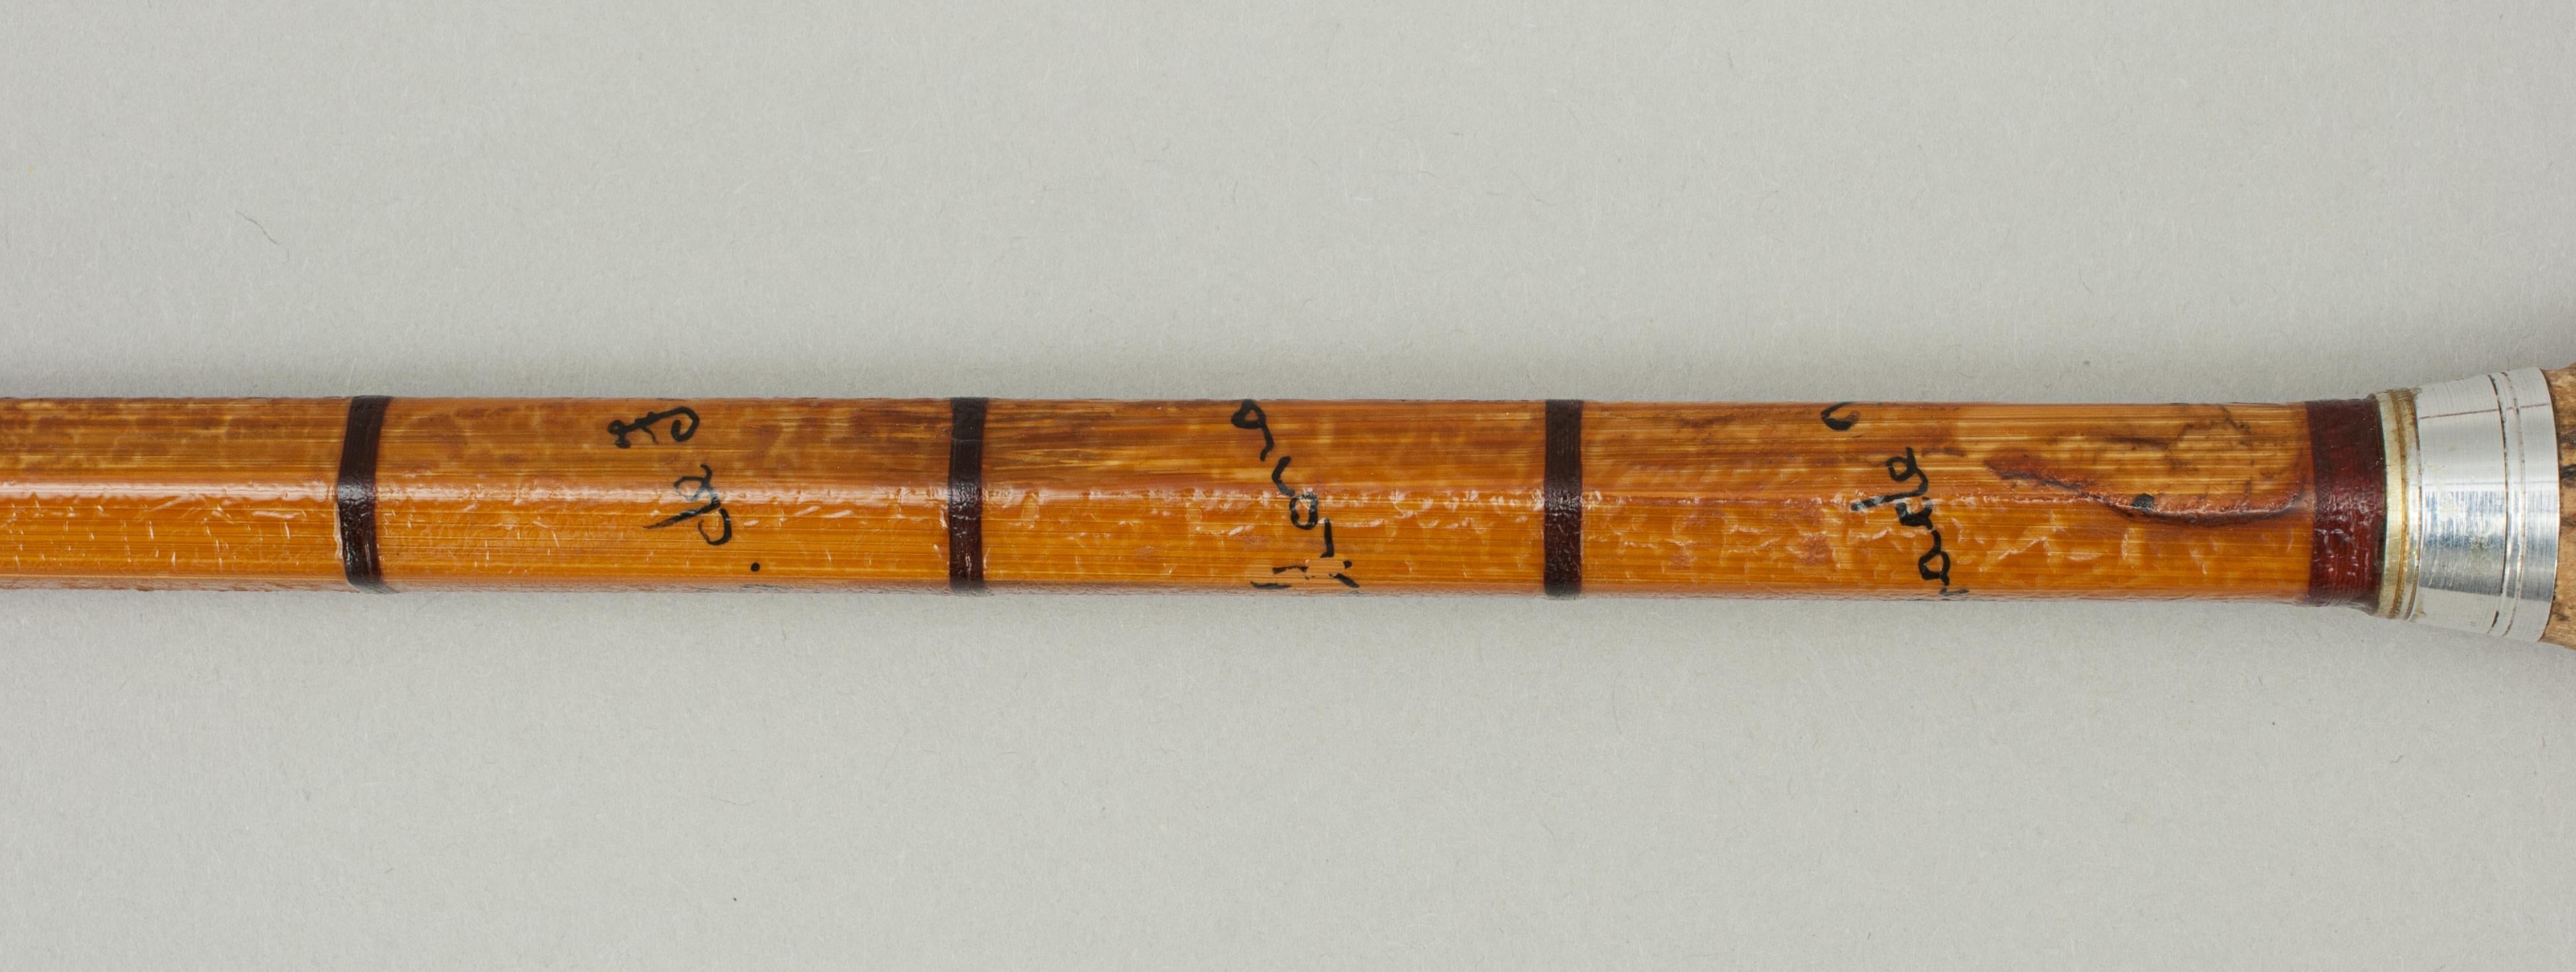 English Vintage Three-Piece Hardy Trout Fly Rod, The 'C.C. de France'.